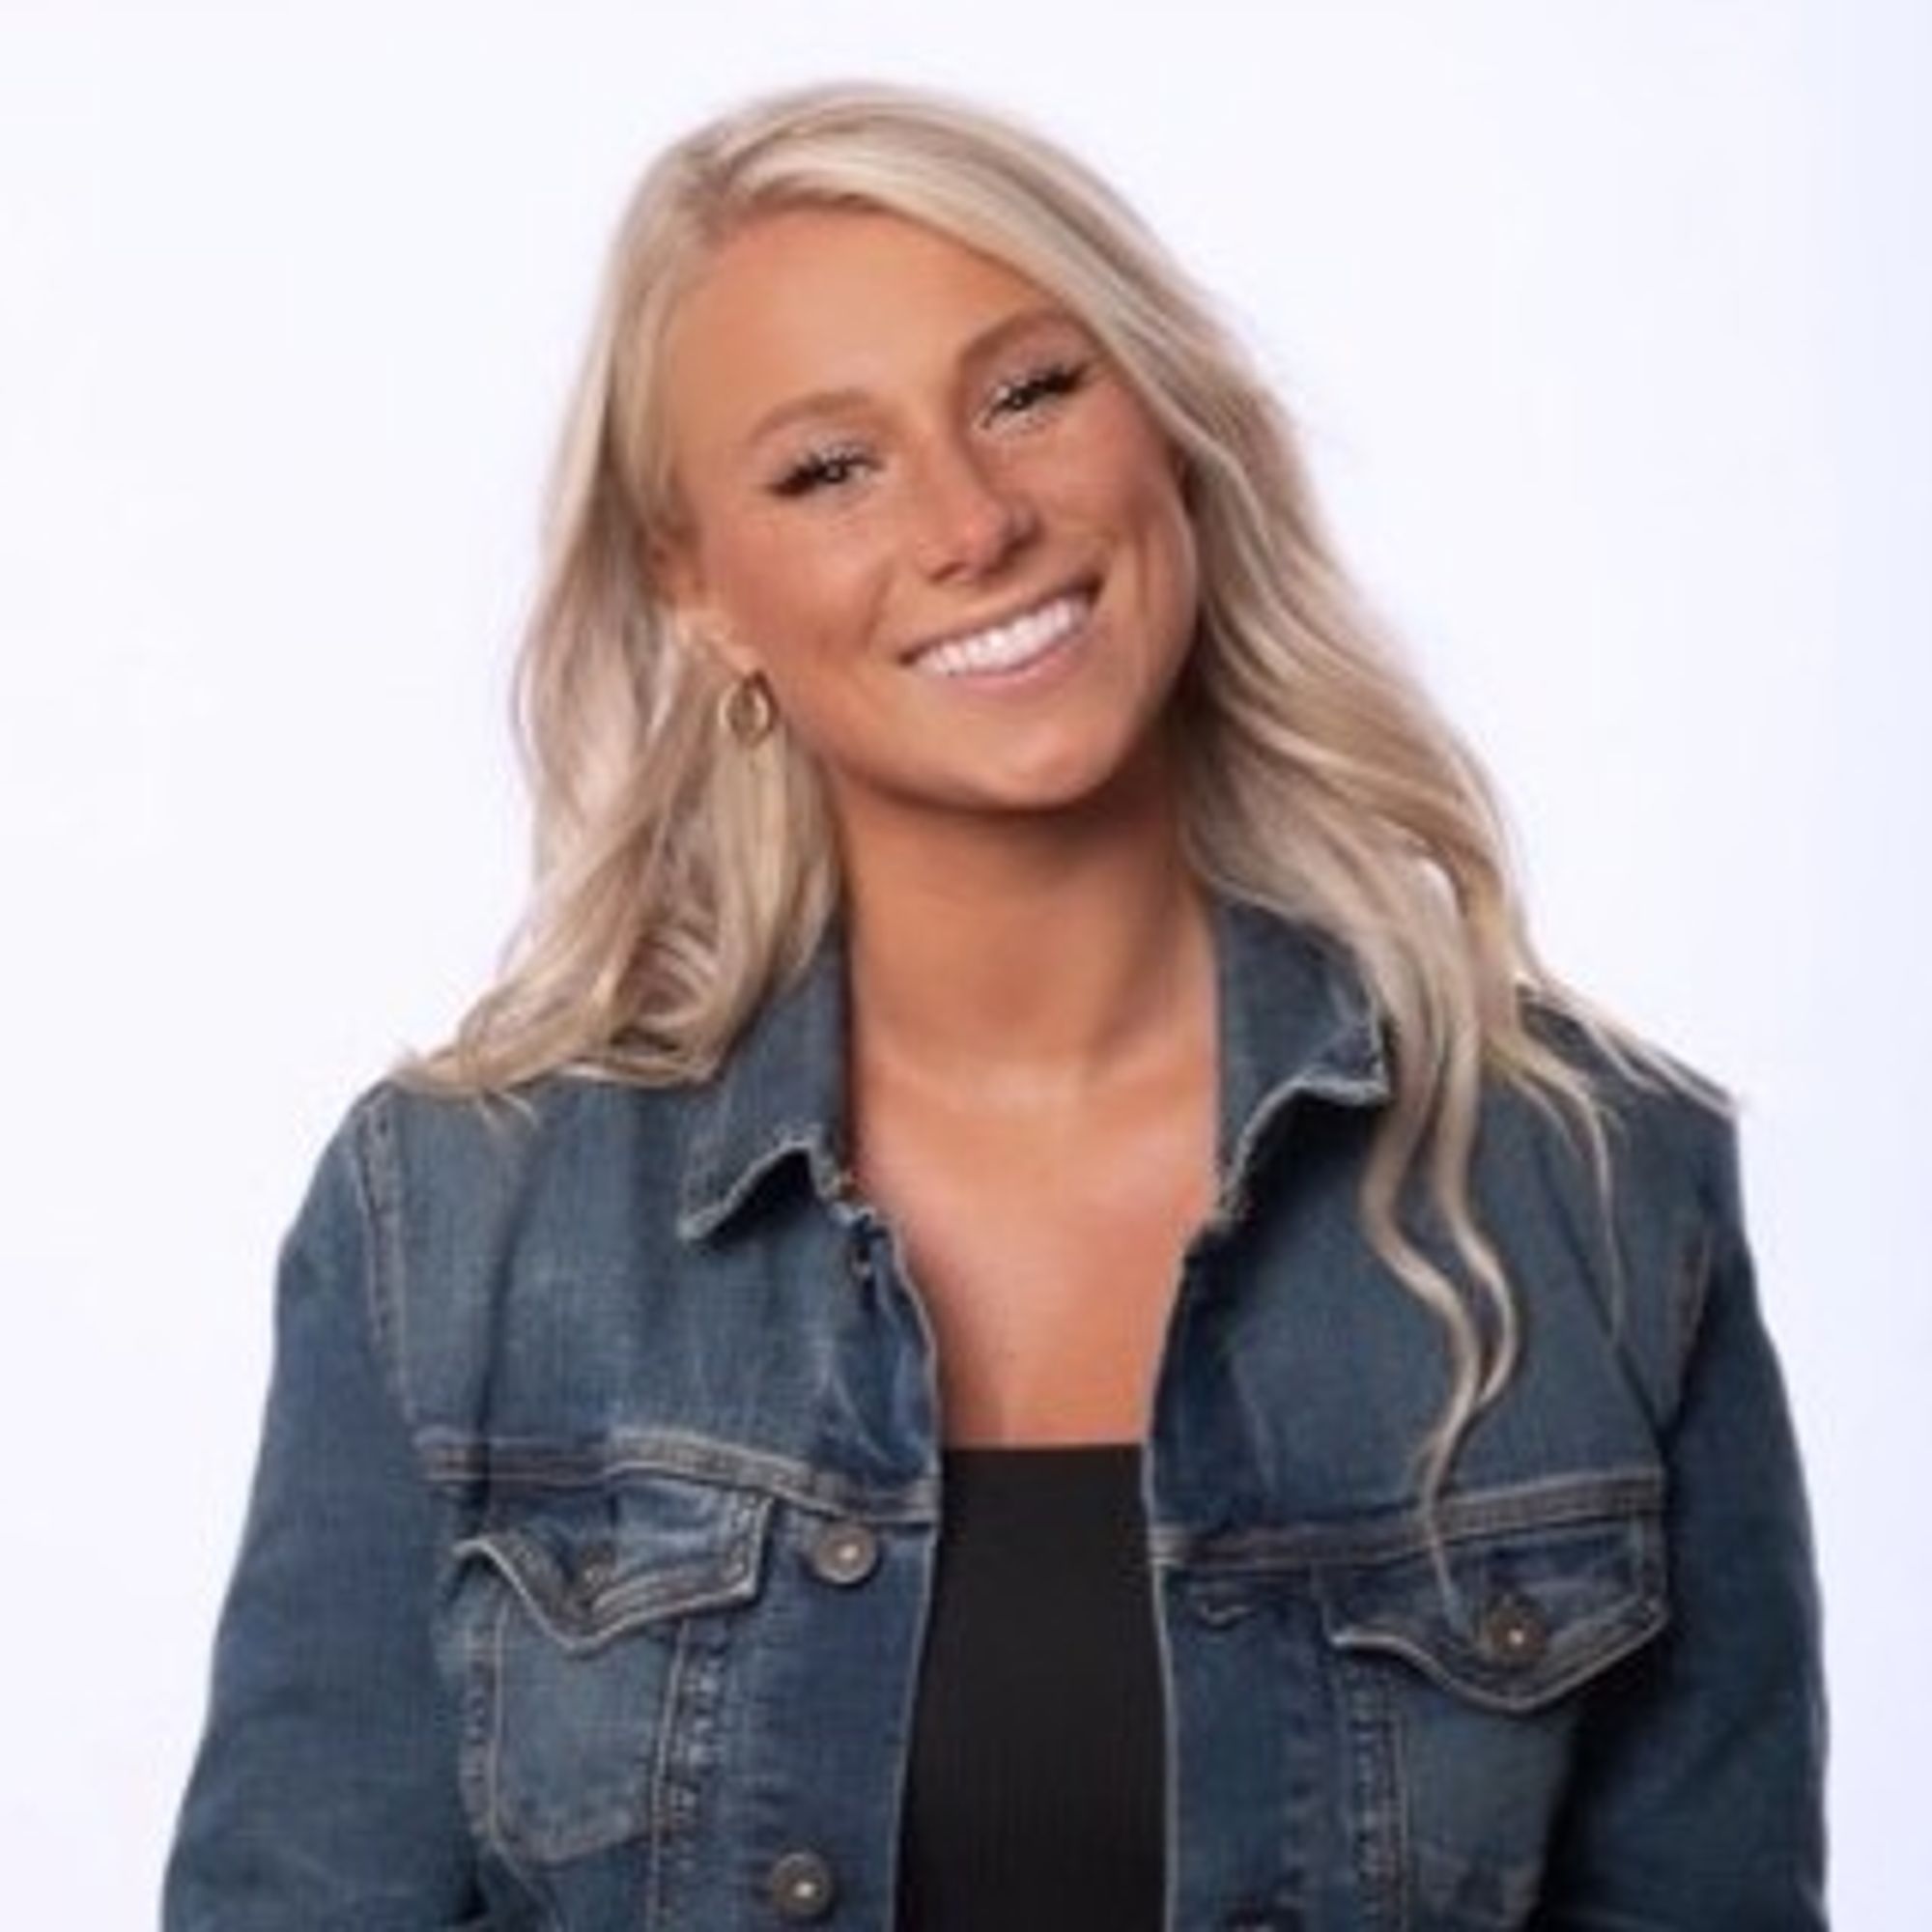 Janae Guy
Sales Recruiter
Formerly Recruiting @ INTURN • Loves all sports, especially the Buffalo Bills.